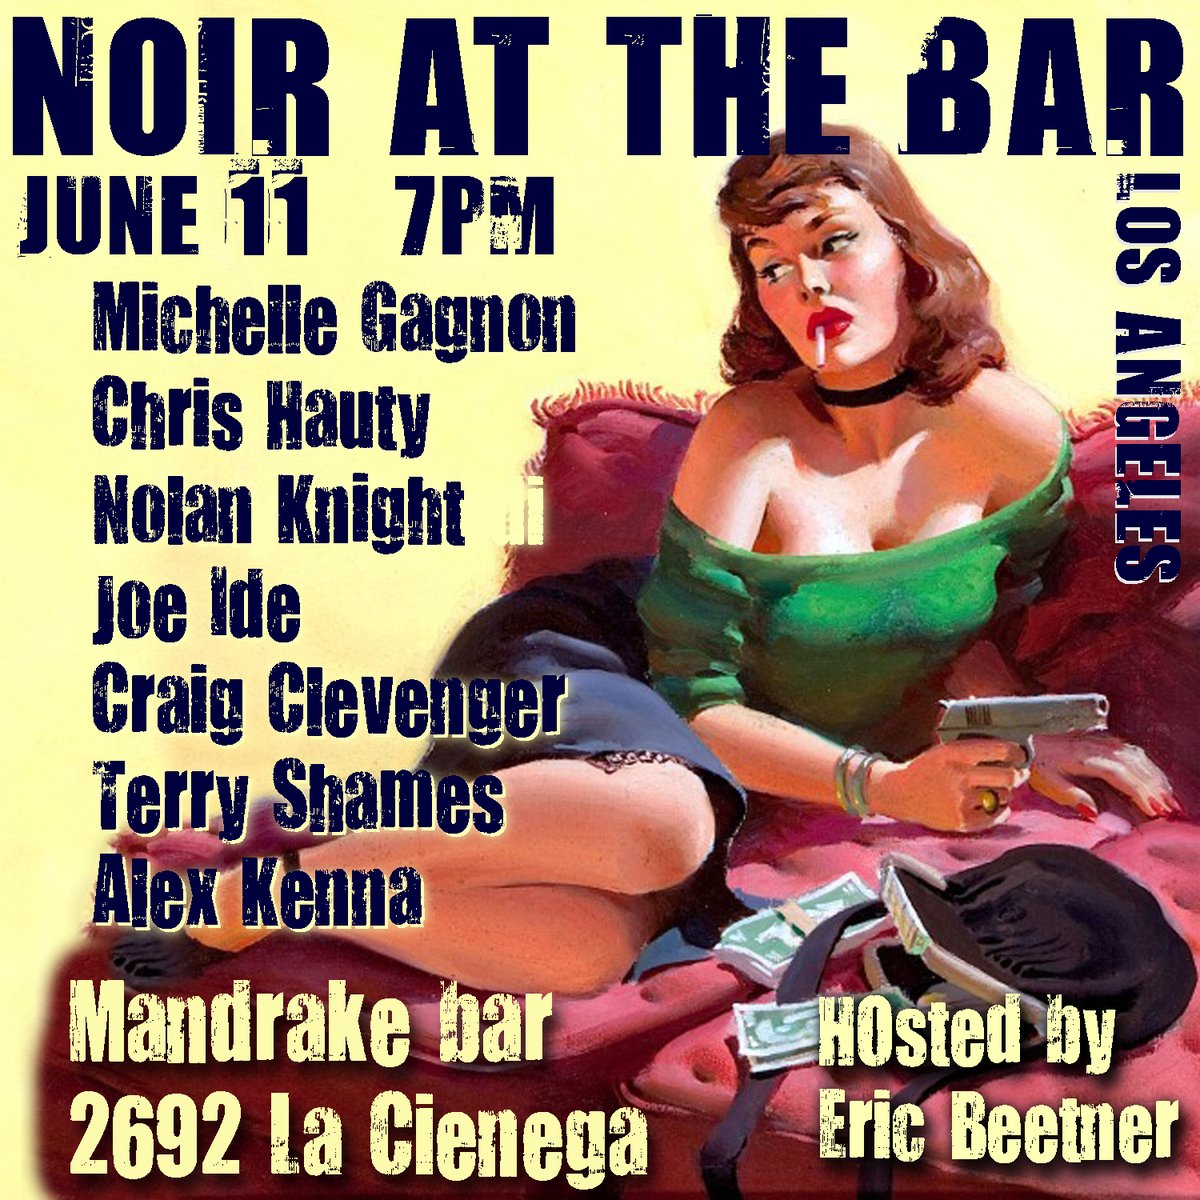 This Sunday Noir at the Bar celebrates 12 years in Los Angeles. How many have you been to? Never too late for your first time with @ChrisHauty @Michelle_Gagnon @CraigClevenger @AlexKenna9 @TerryShames @JoeIdeAuthor Books for sale by @book_jewel